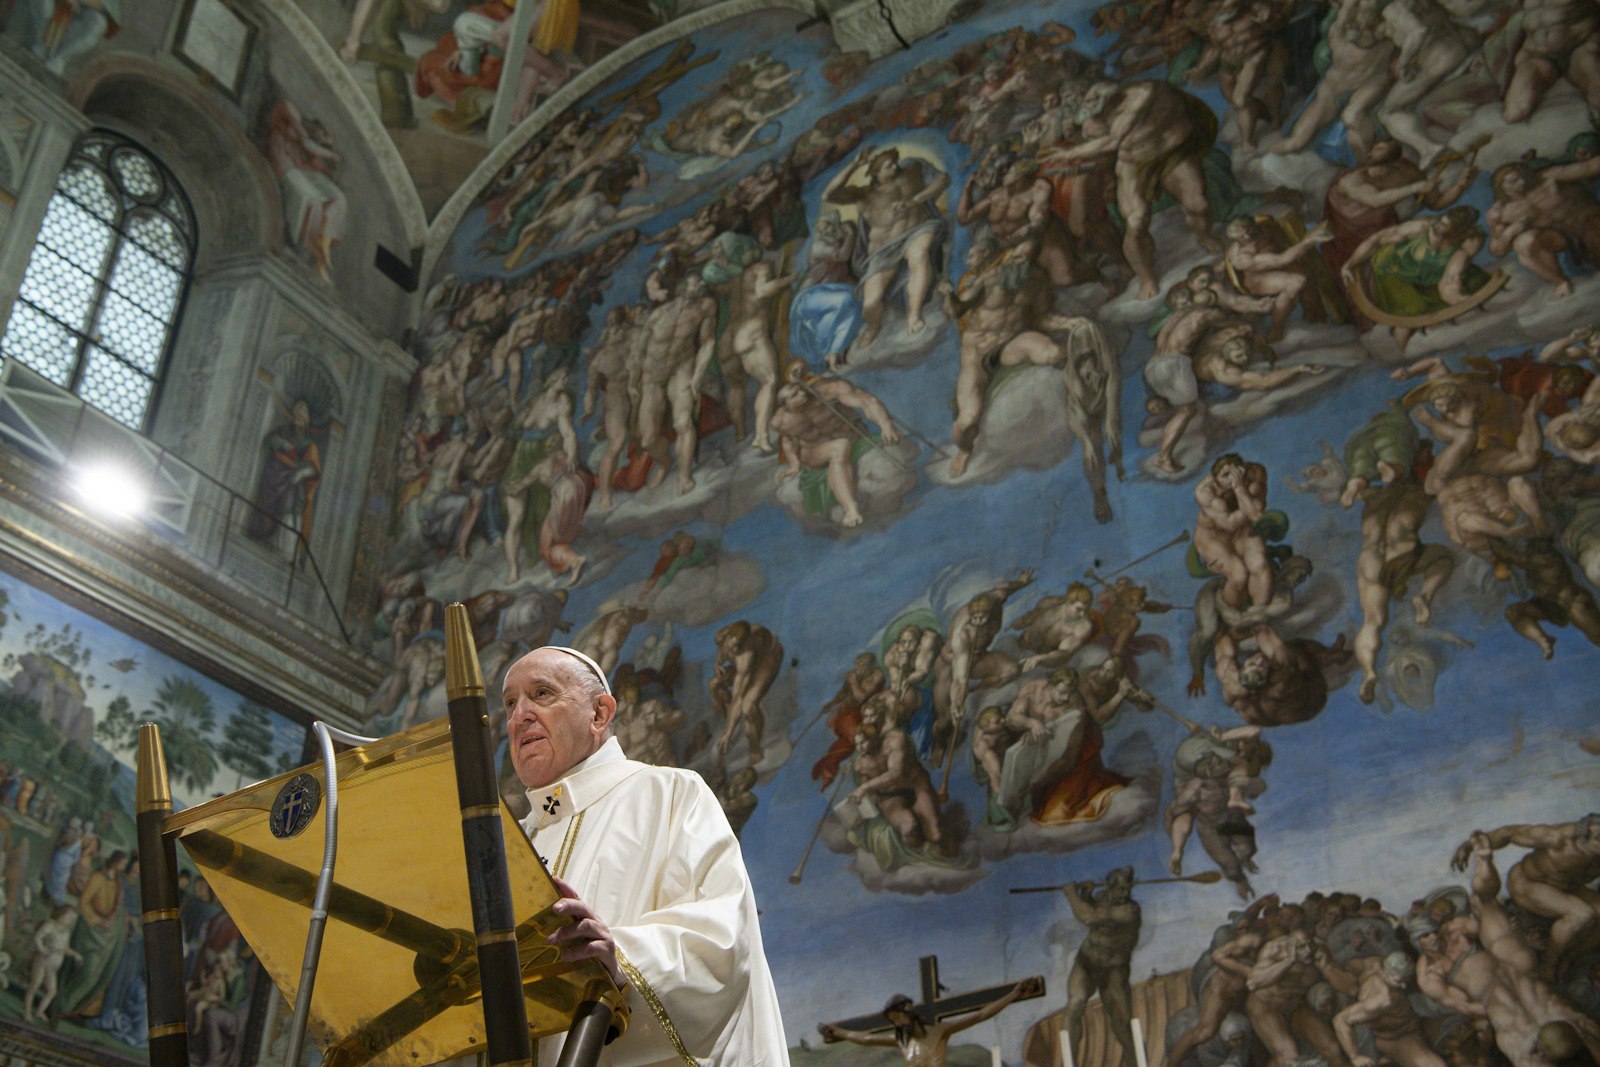 Pope Francis gives a homily in front of Michelangelo's fresco of the "Last Judgment" as he celebrates Mass marking the feast of the Baptism of the Lord in the Sistine Chapel at the Vatican on Jan. 9, 2022. (CNS photo/Vatican Media)